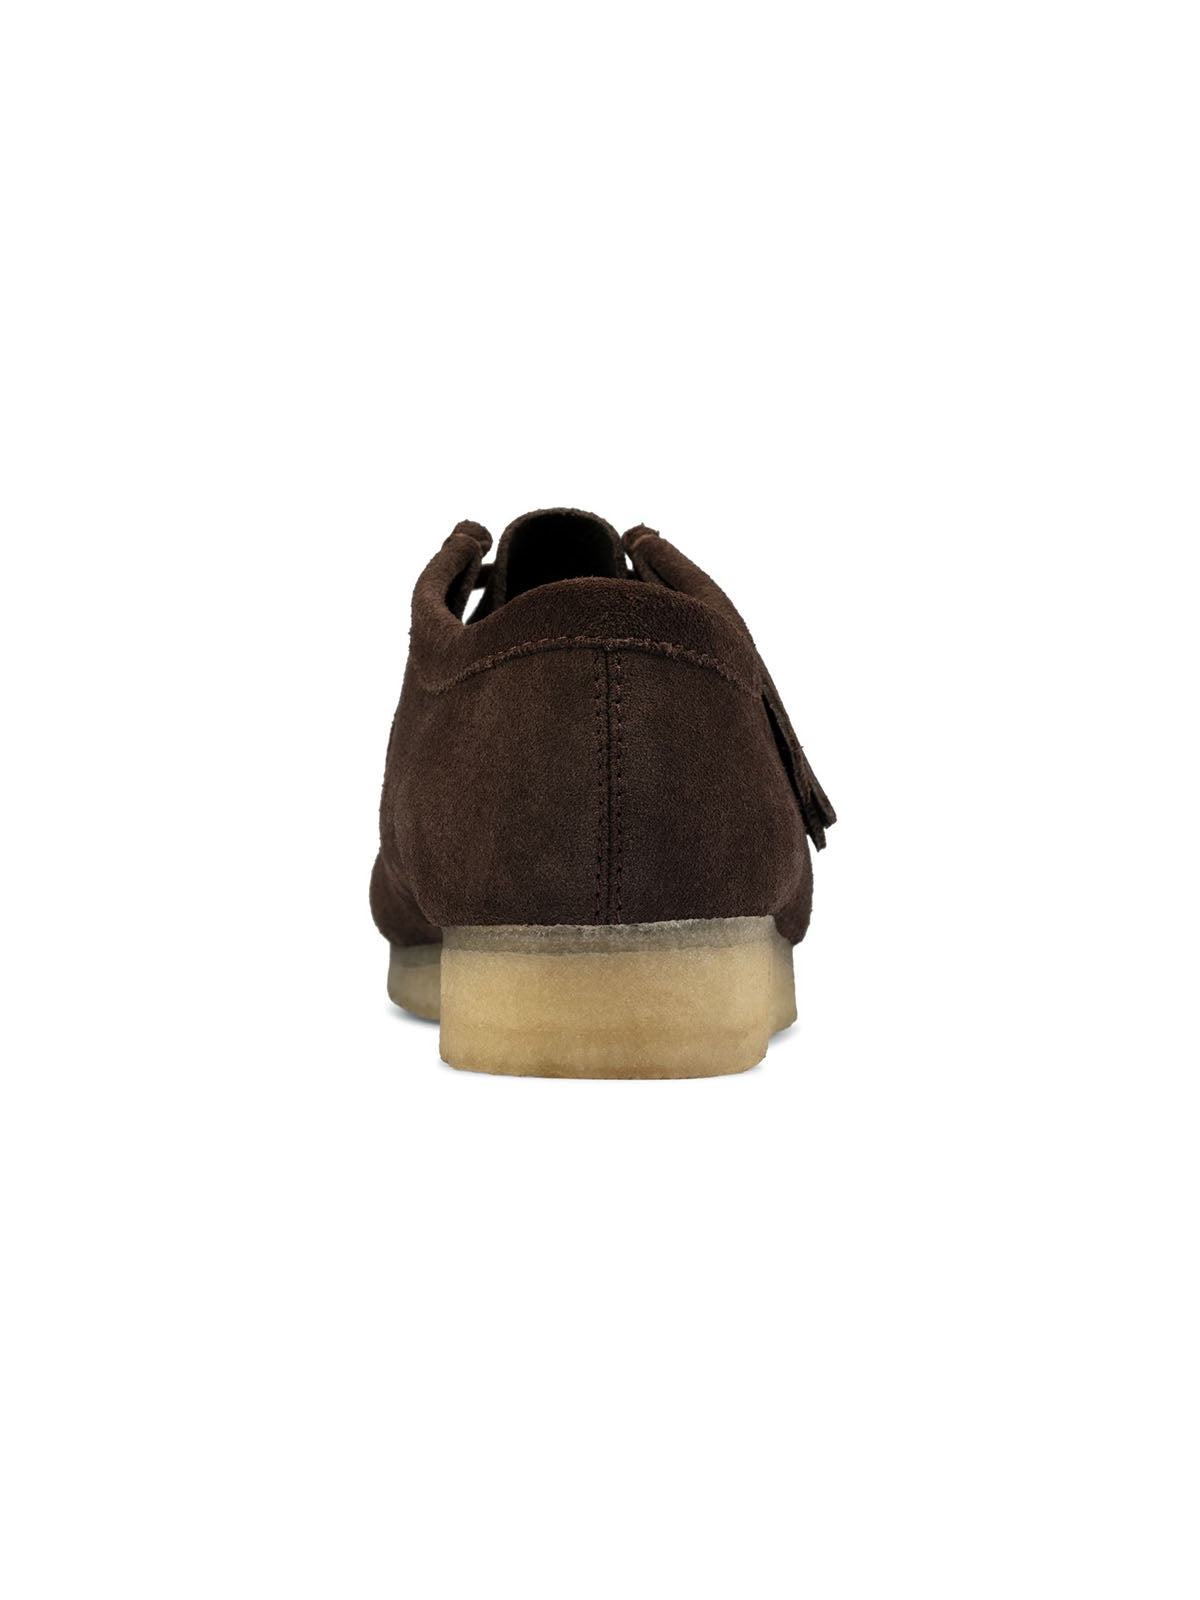 Clarks Unisex Flat Lace Up Shoes - Clarks Wallabee - Brown